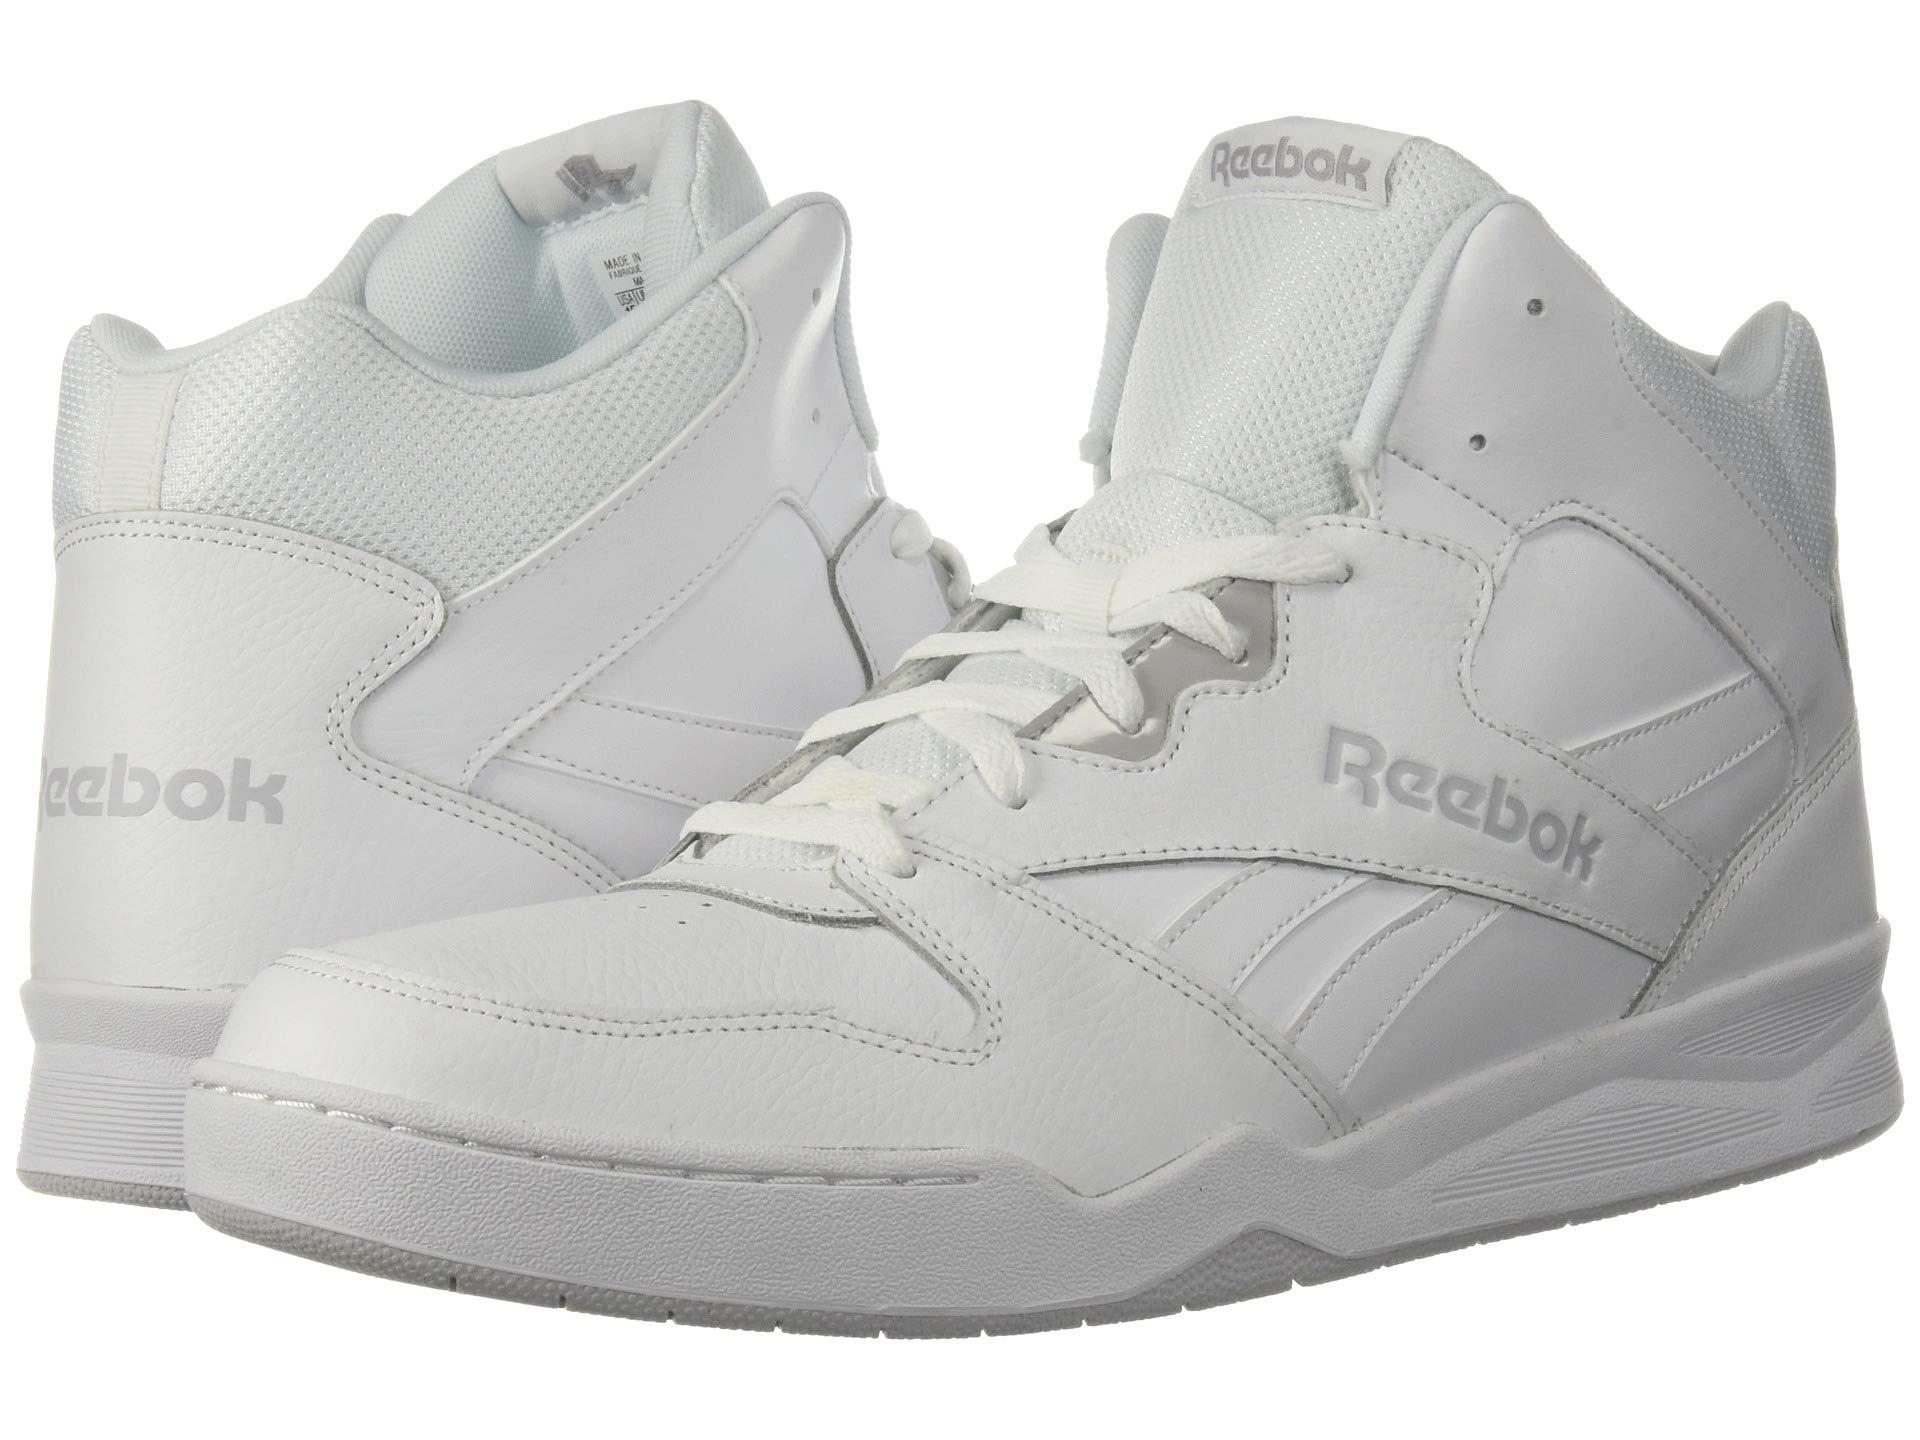 Reebok Synthetic Royal Bb4500 Hi 2 in White for Men - Lyst